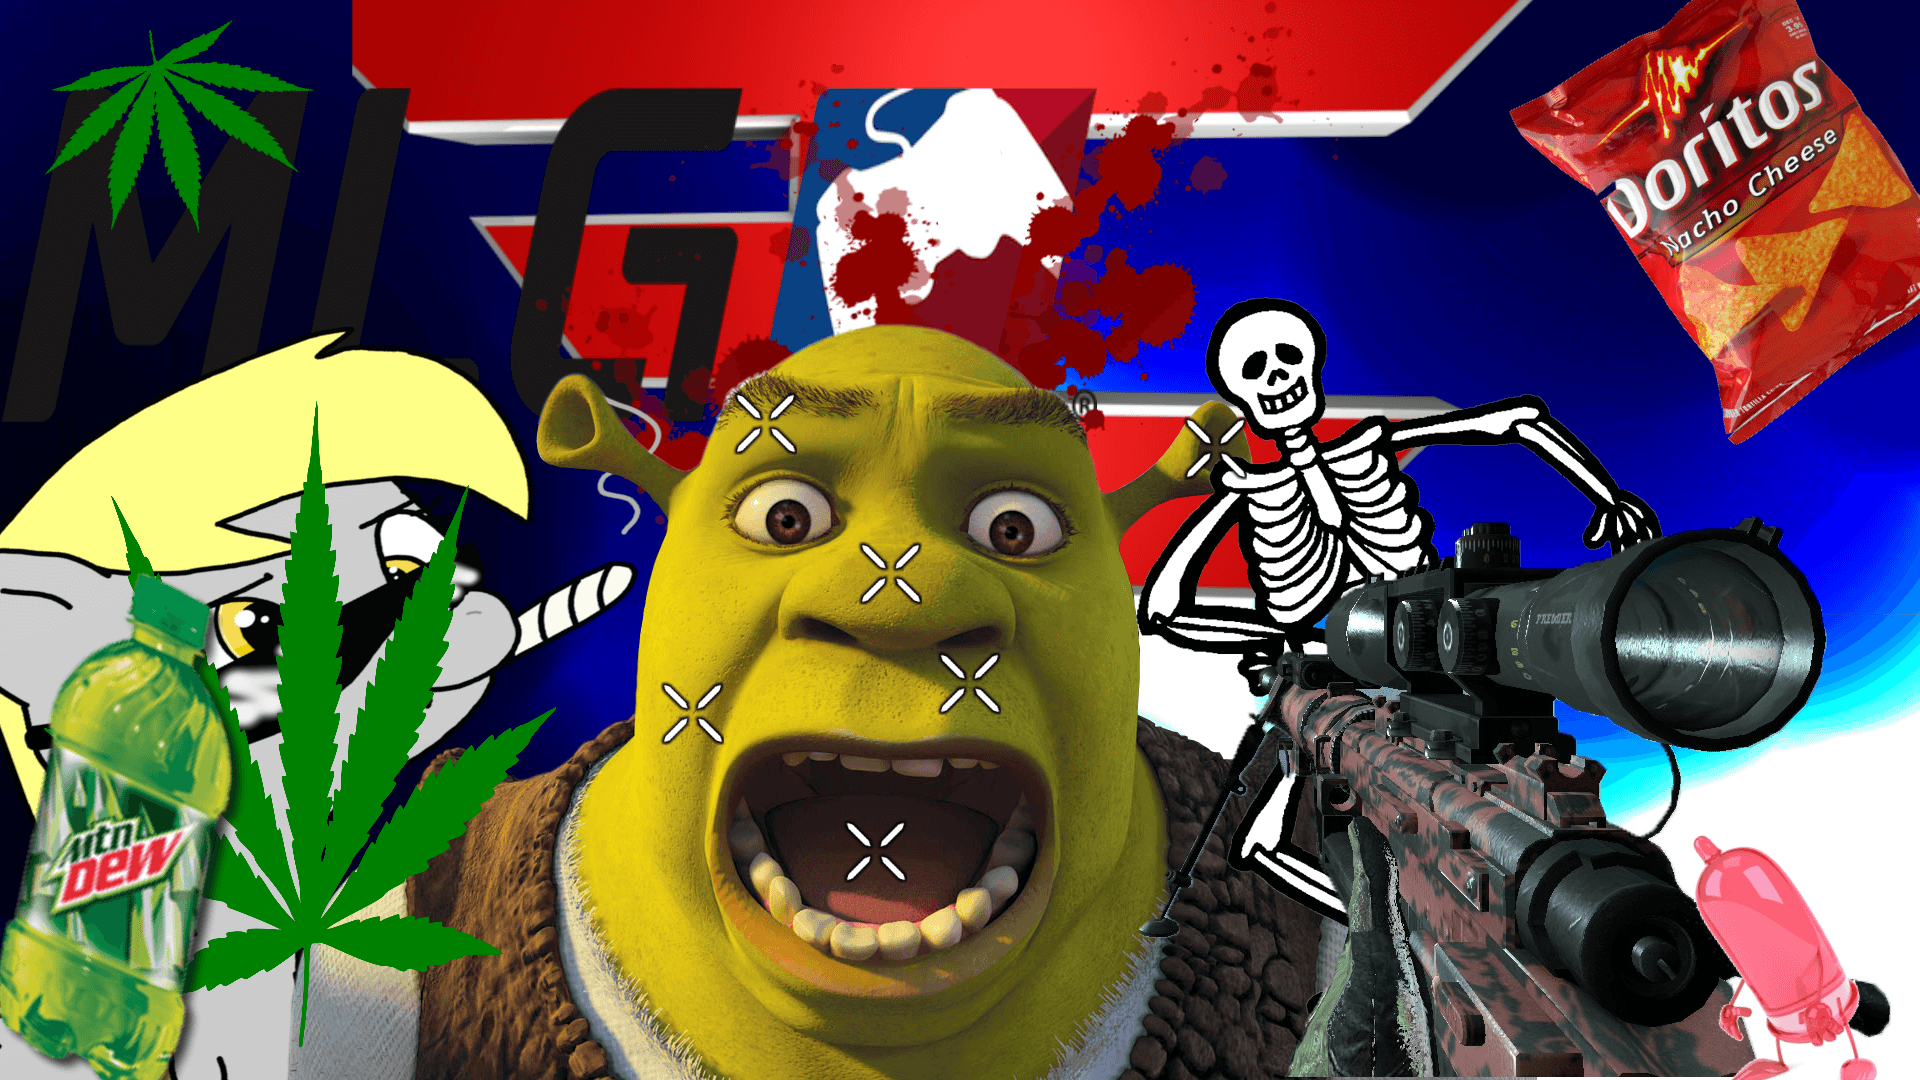 Shrek is holding a rifle and looking at a skeleton while smoking a joint - Doritos, Shrek